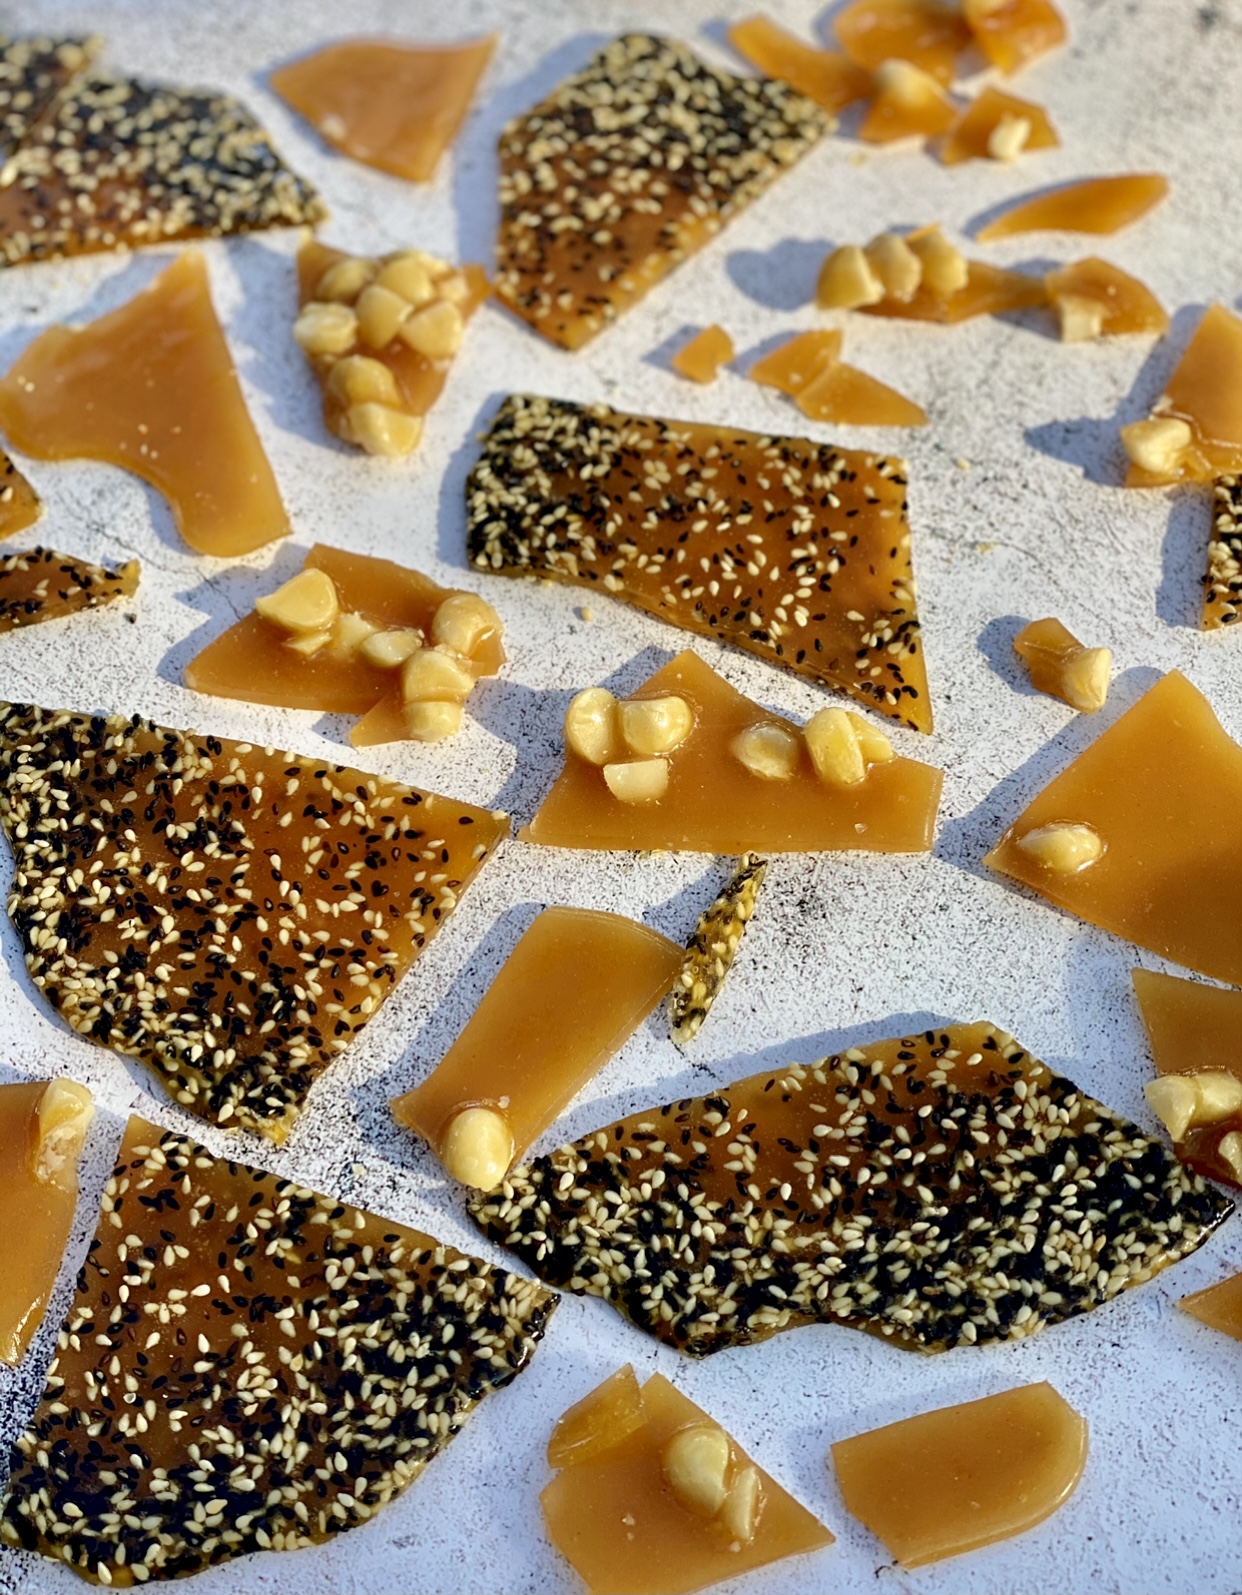 HOW TO MAKE BRITTLE